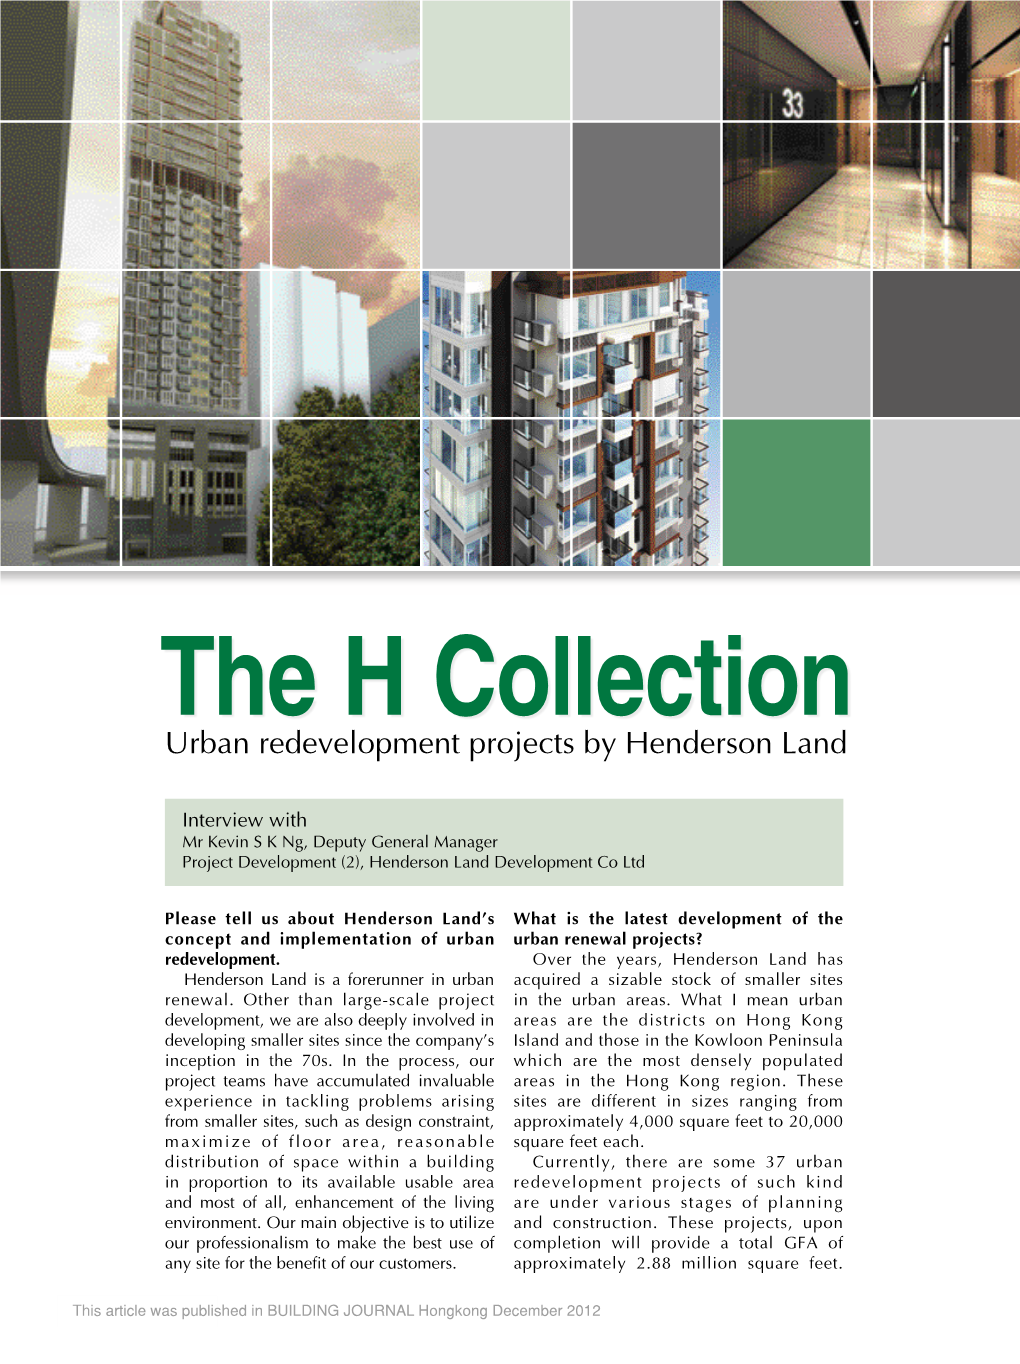 The H Collection Urban Redevelopment Projects by Henderson Land